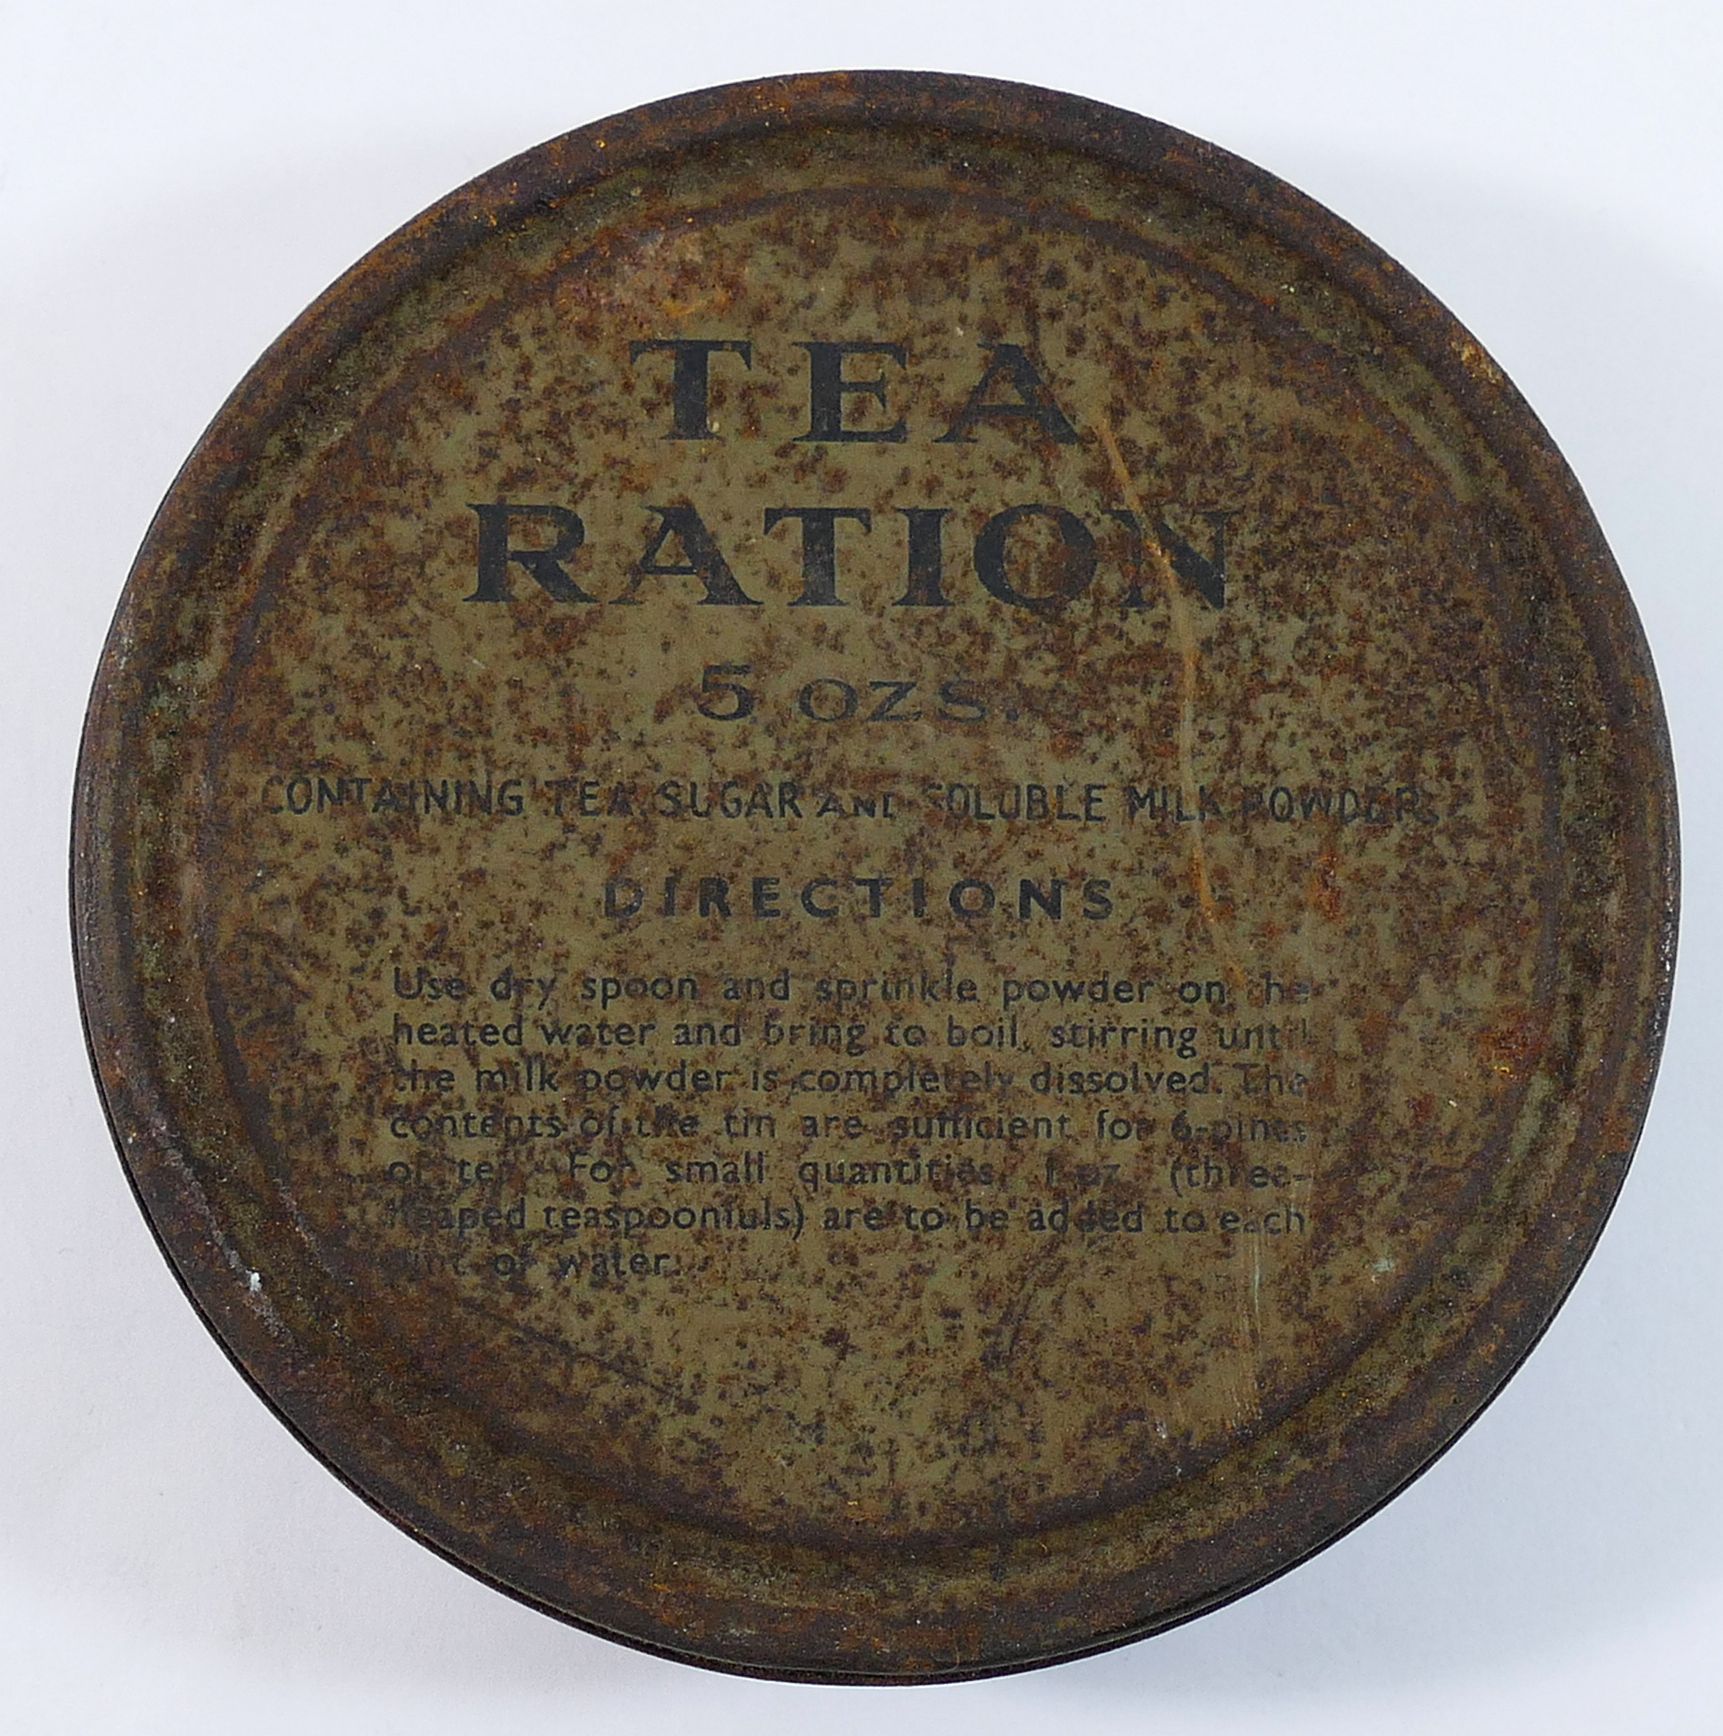 A WWII tea ration 5oz circular tin, 'Containing tea, sugar and soluble milk powder', with